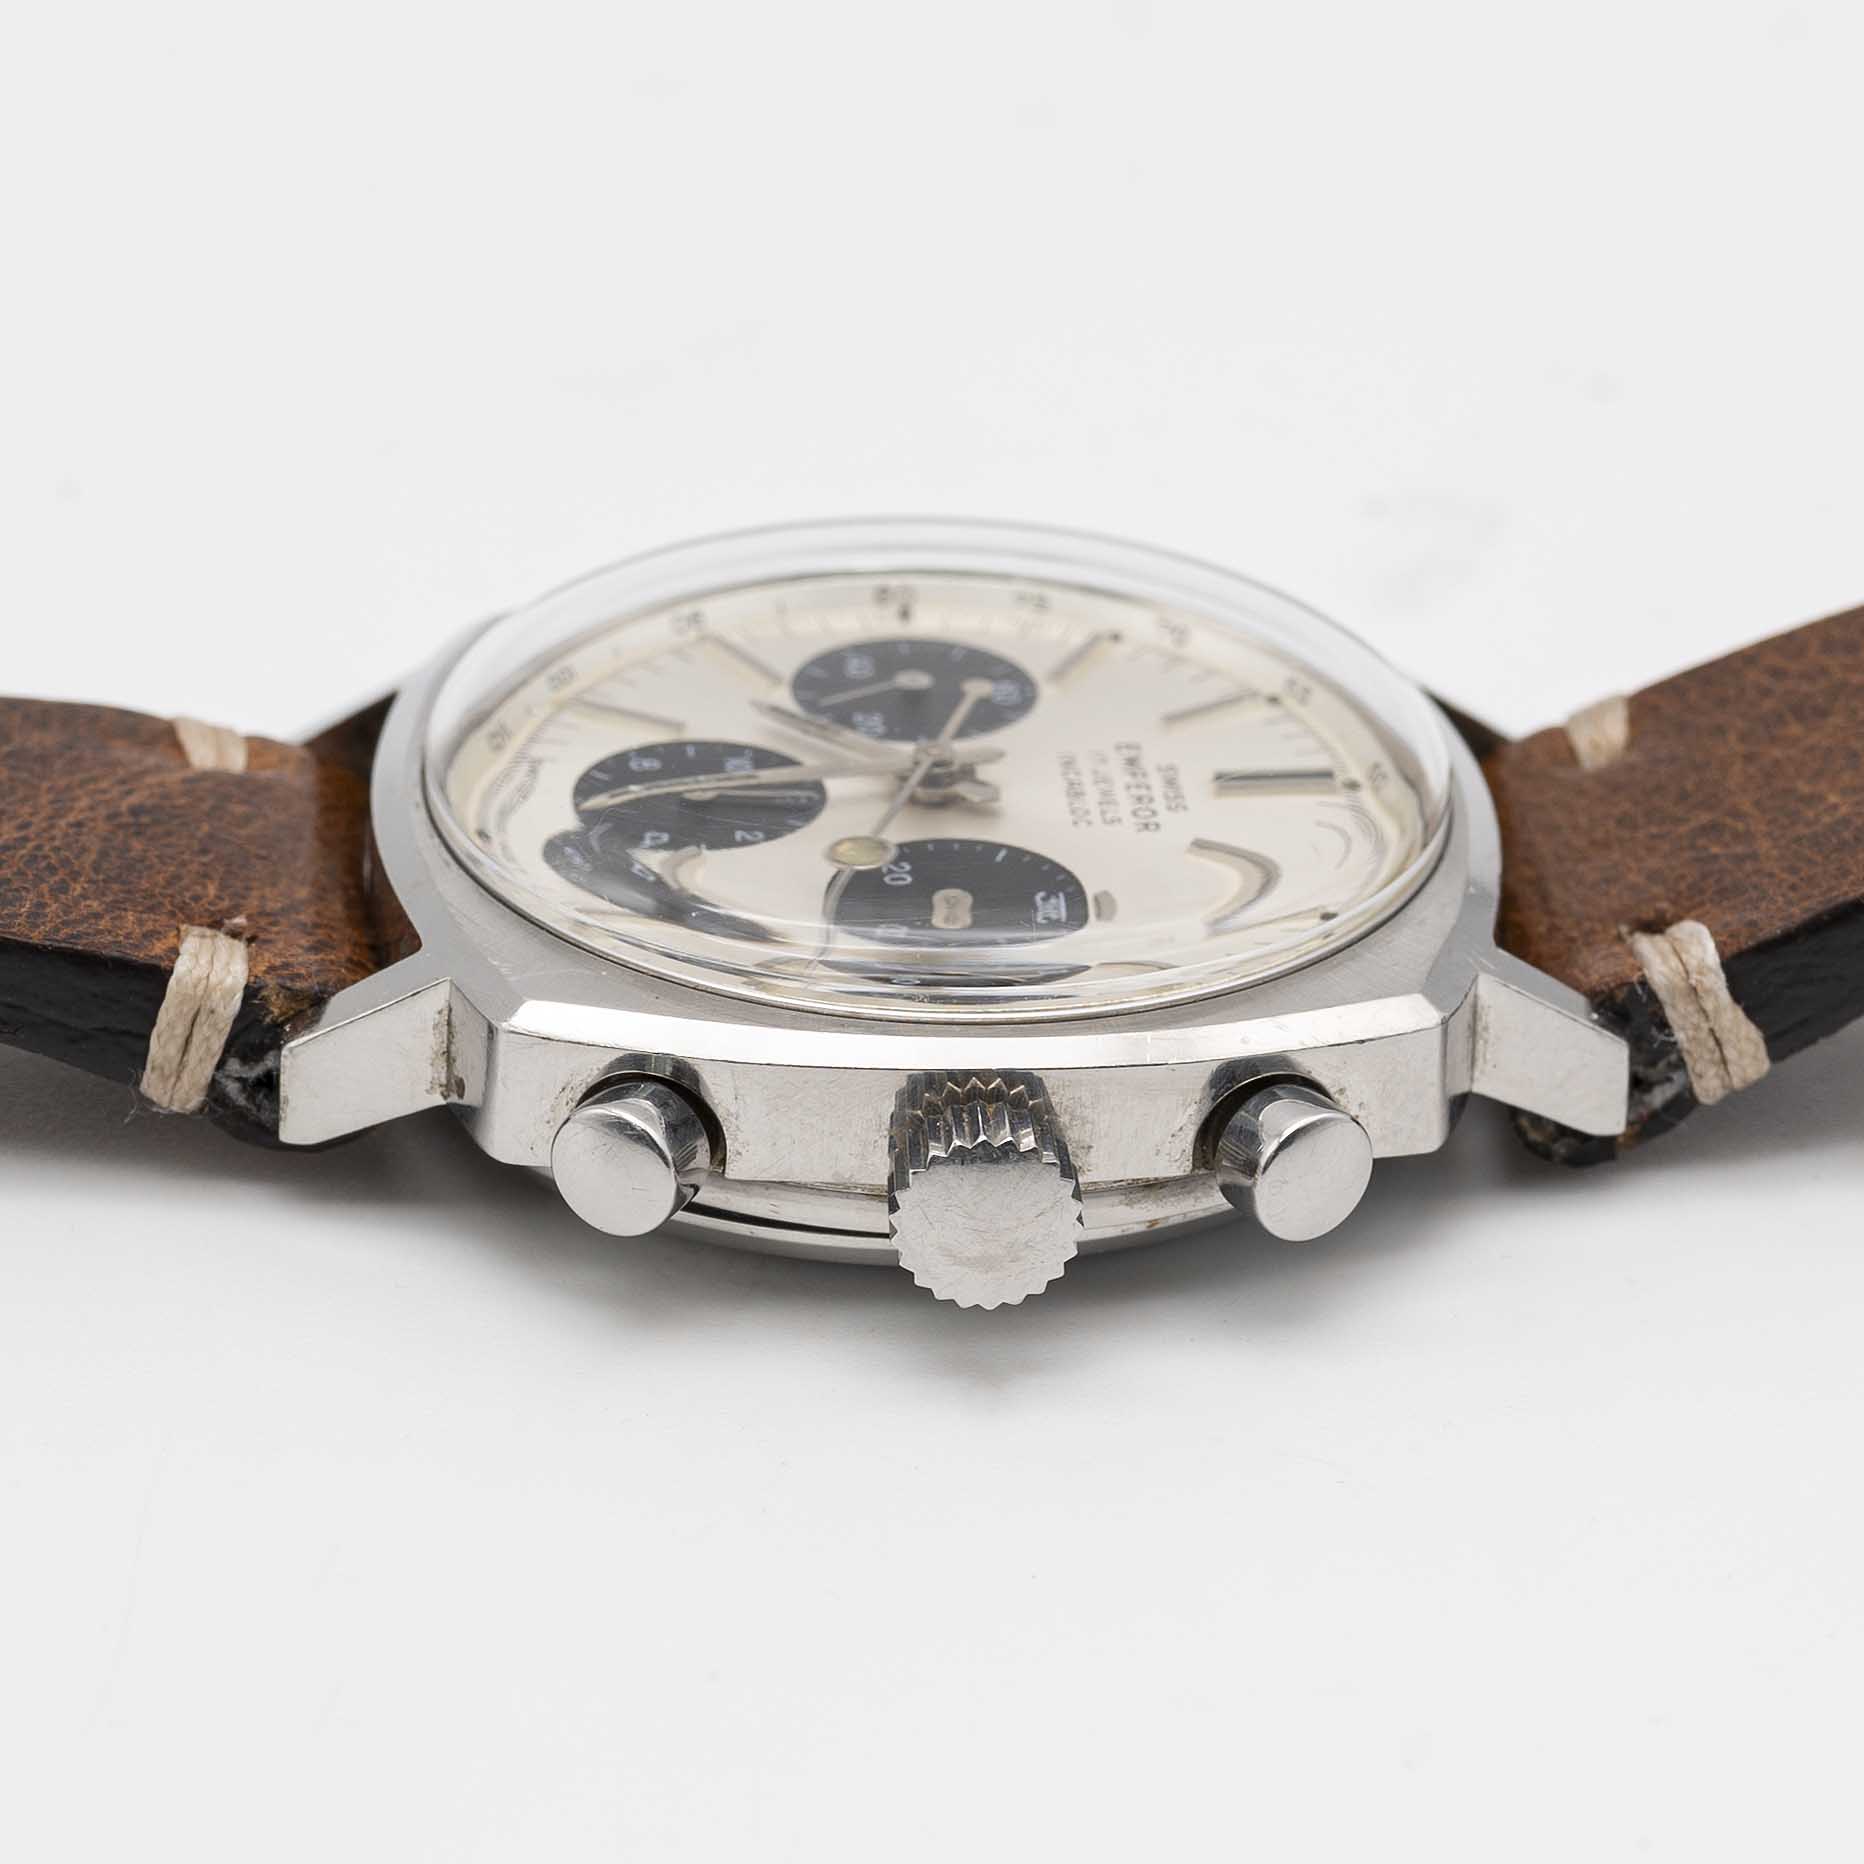 A GENTLEMAN'S STAINLESS STEEL SWISS EMPEROR CAMARO CHRONOGRAPH WRIST WATCH CIRCA 1970, WITH - Image 7 of 8